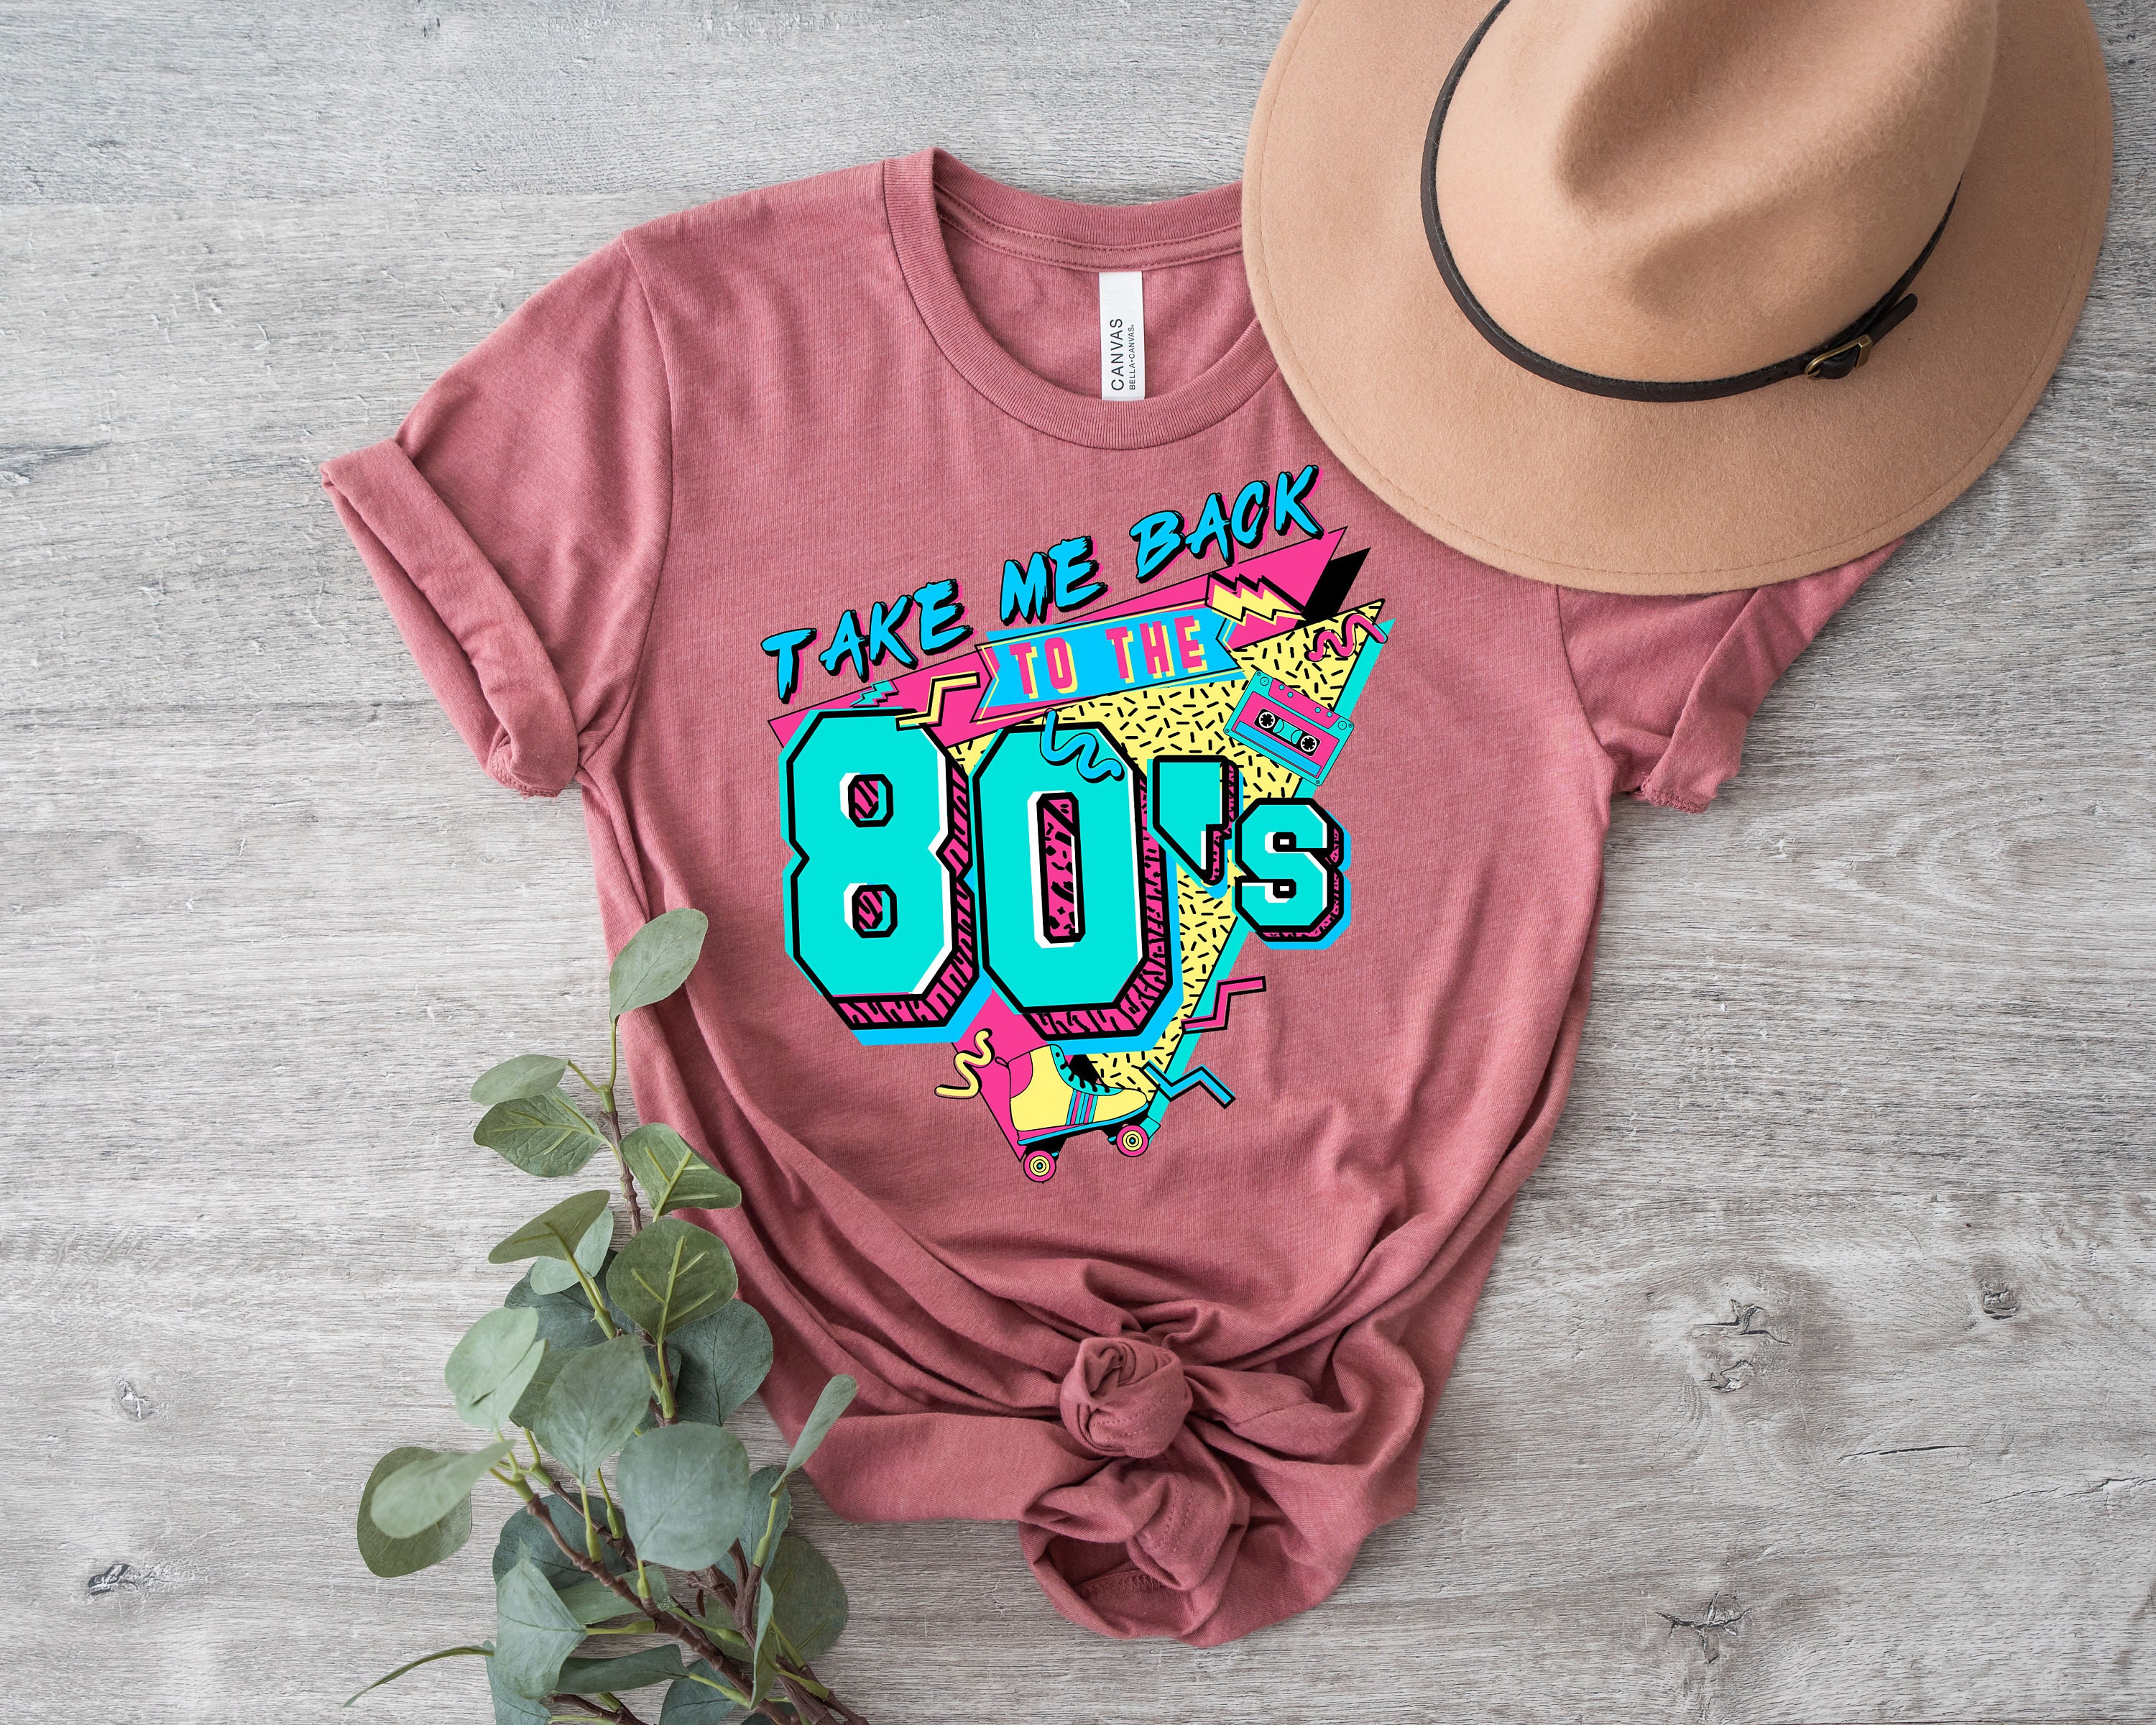  80s Shirts Women Take Me Back to The 80's Tshirts 80s Baby Tee  80's Party Vintage Nostalgia Short Sleeve Top : Clothing, Shoes & Jewelry